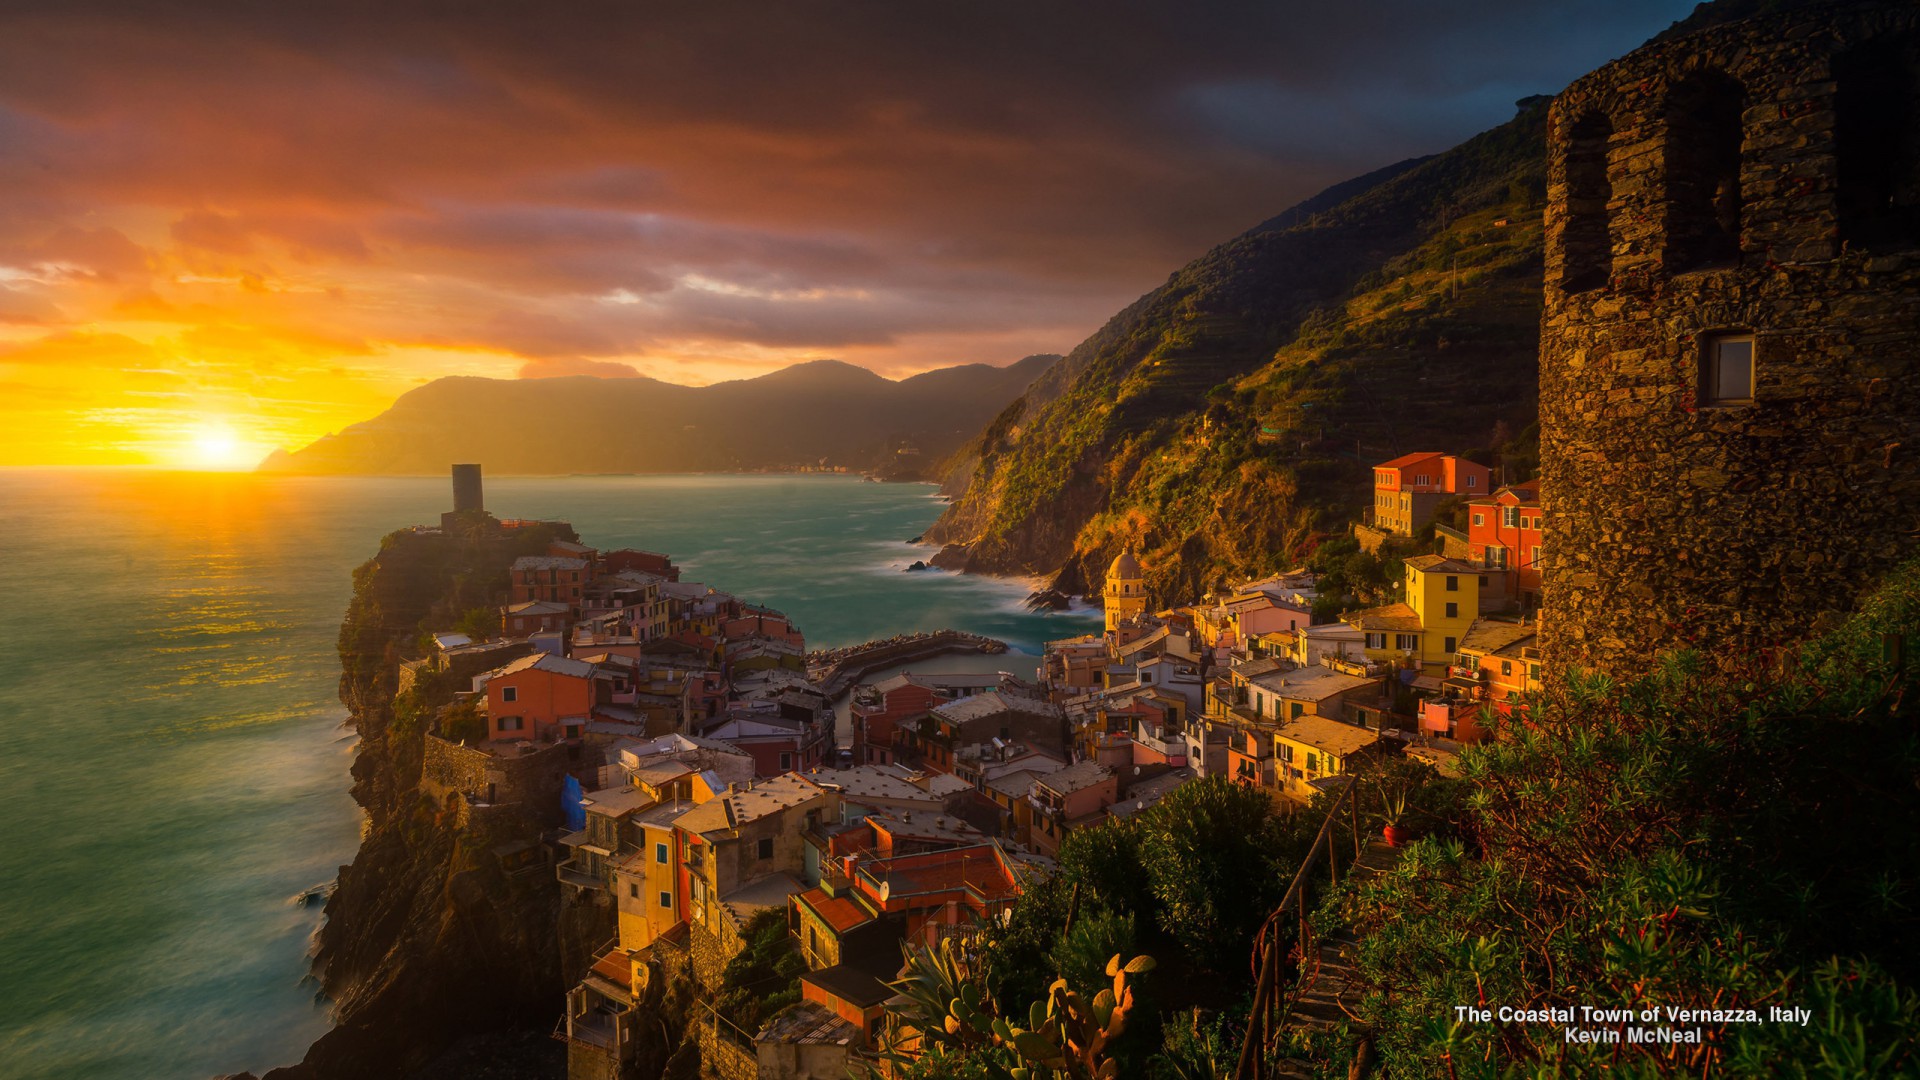 Vernazza, Italy at Sunset by Kevin McNeal